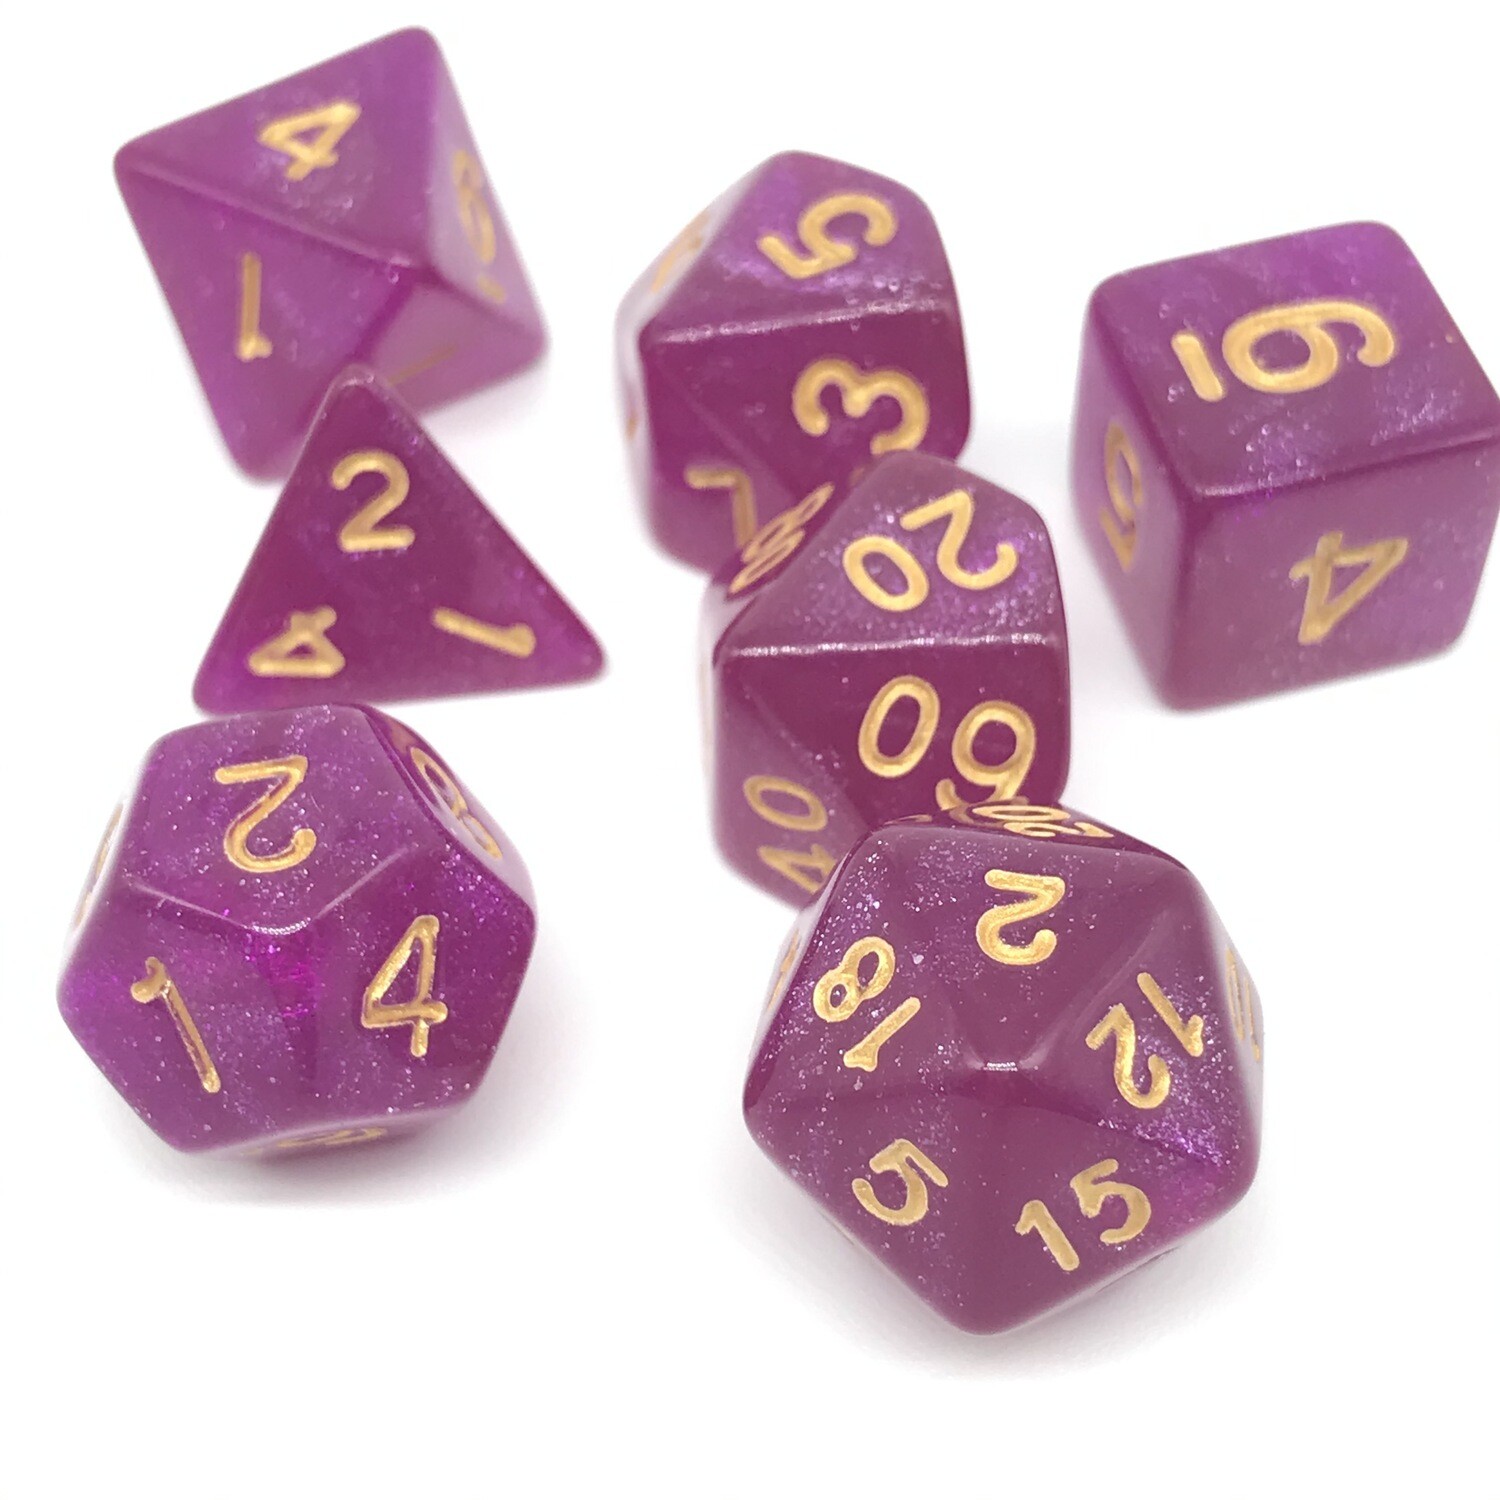 Dice Set - Pink sparkly with gold numbers